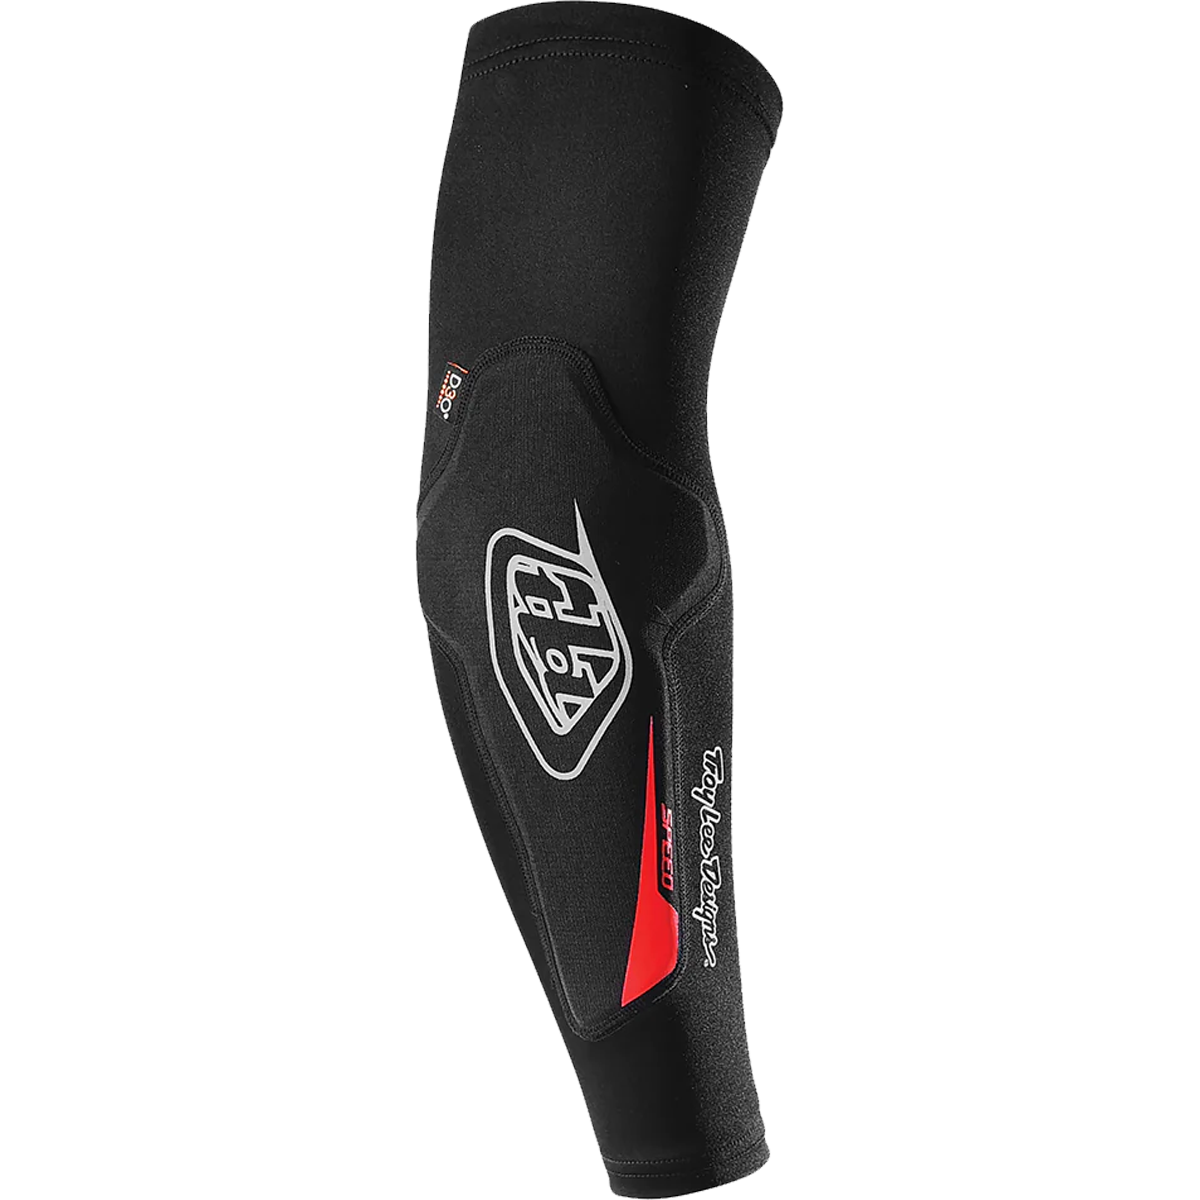 Youth Speed Elbow Sleeve - Large alternate view